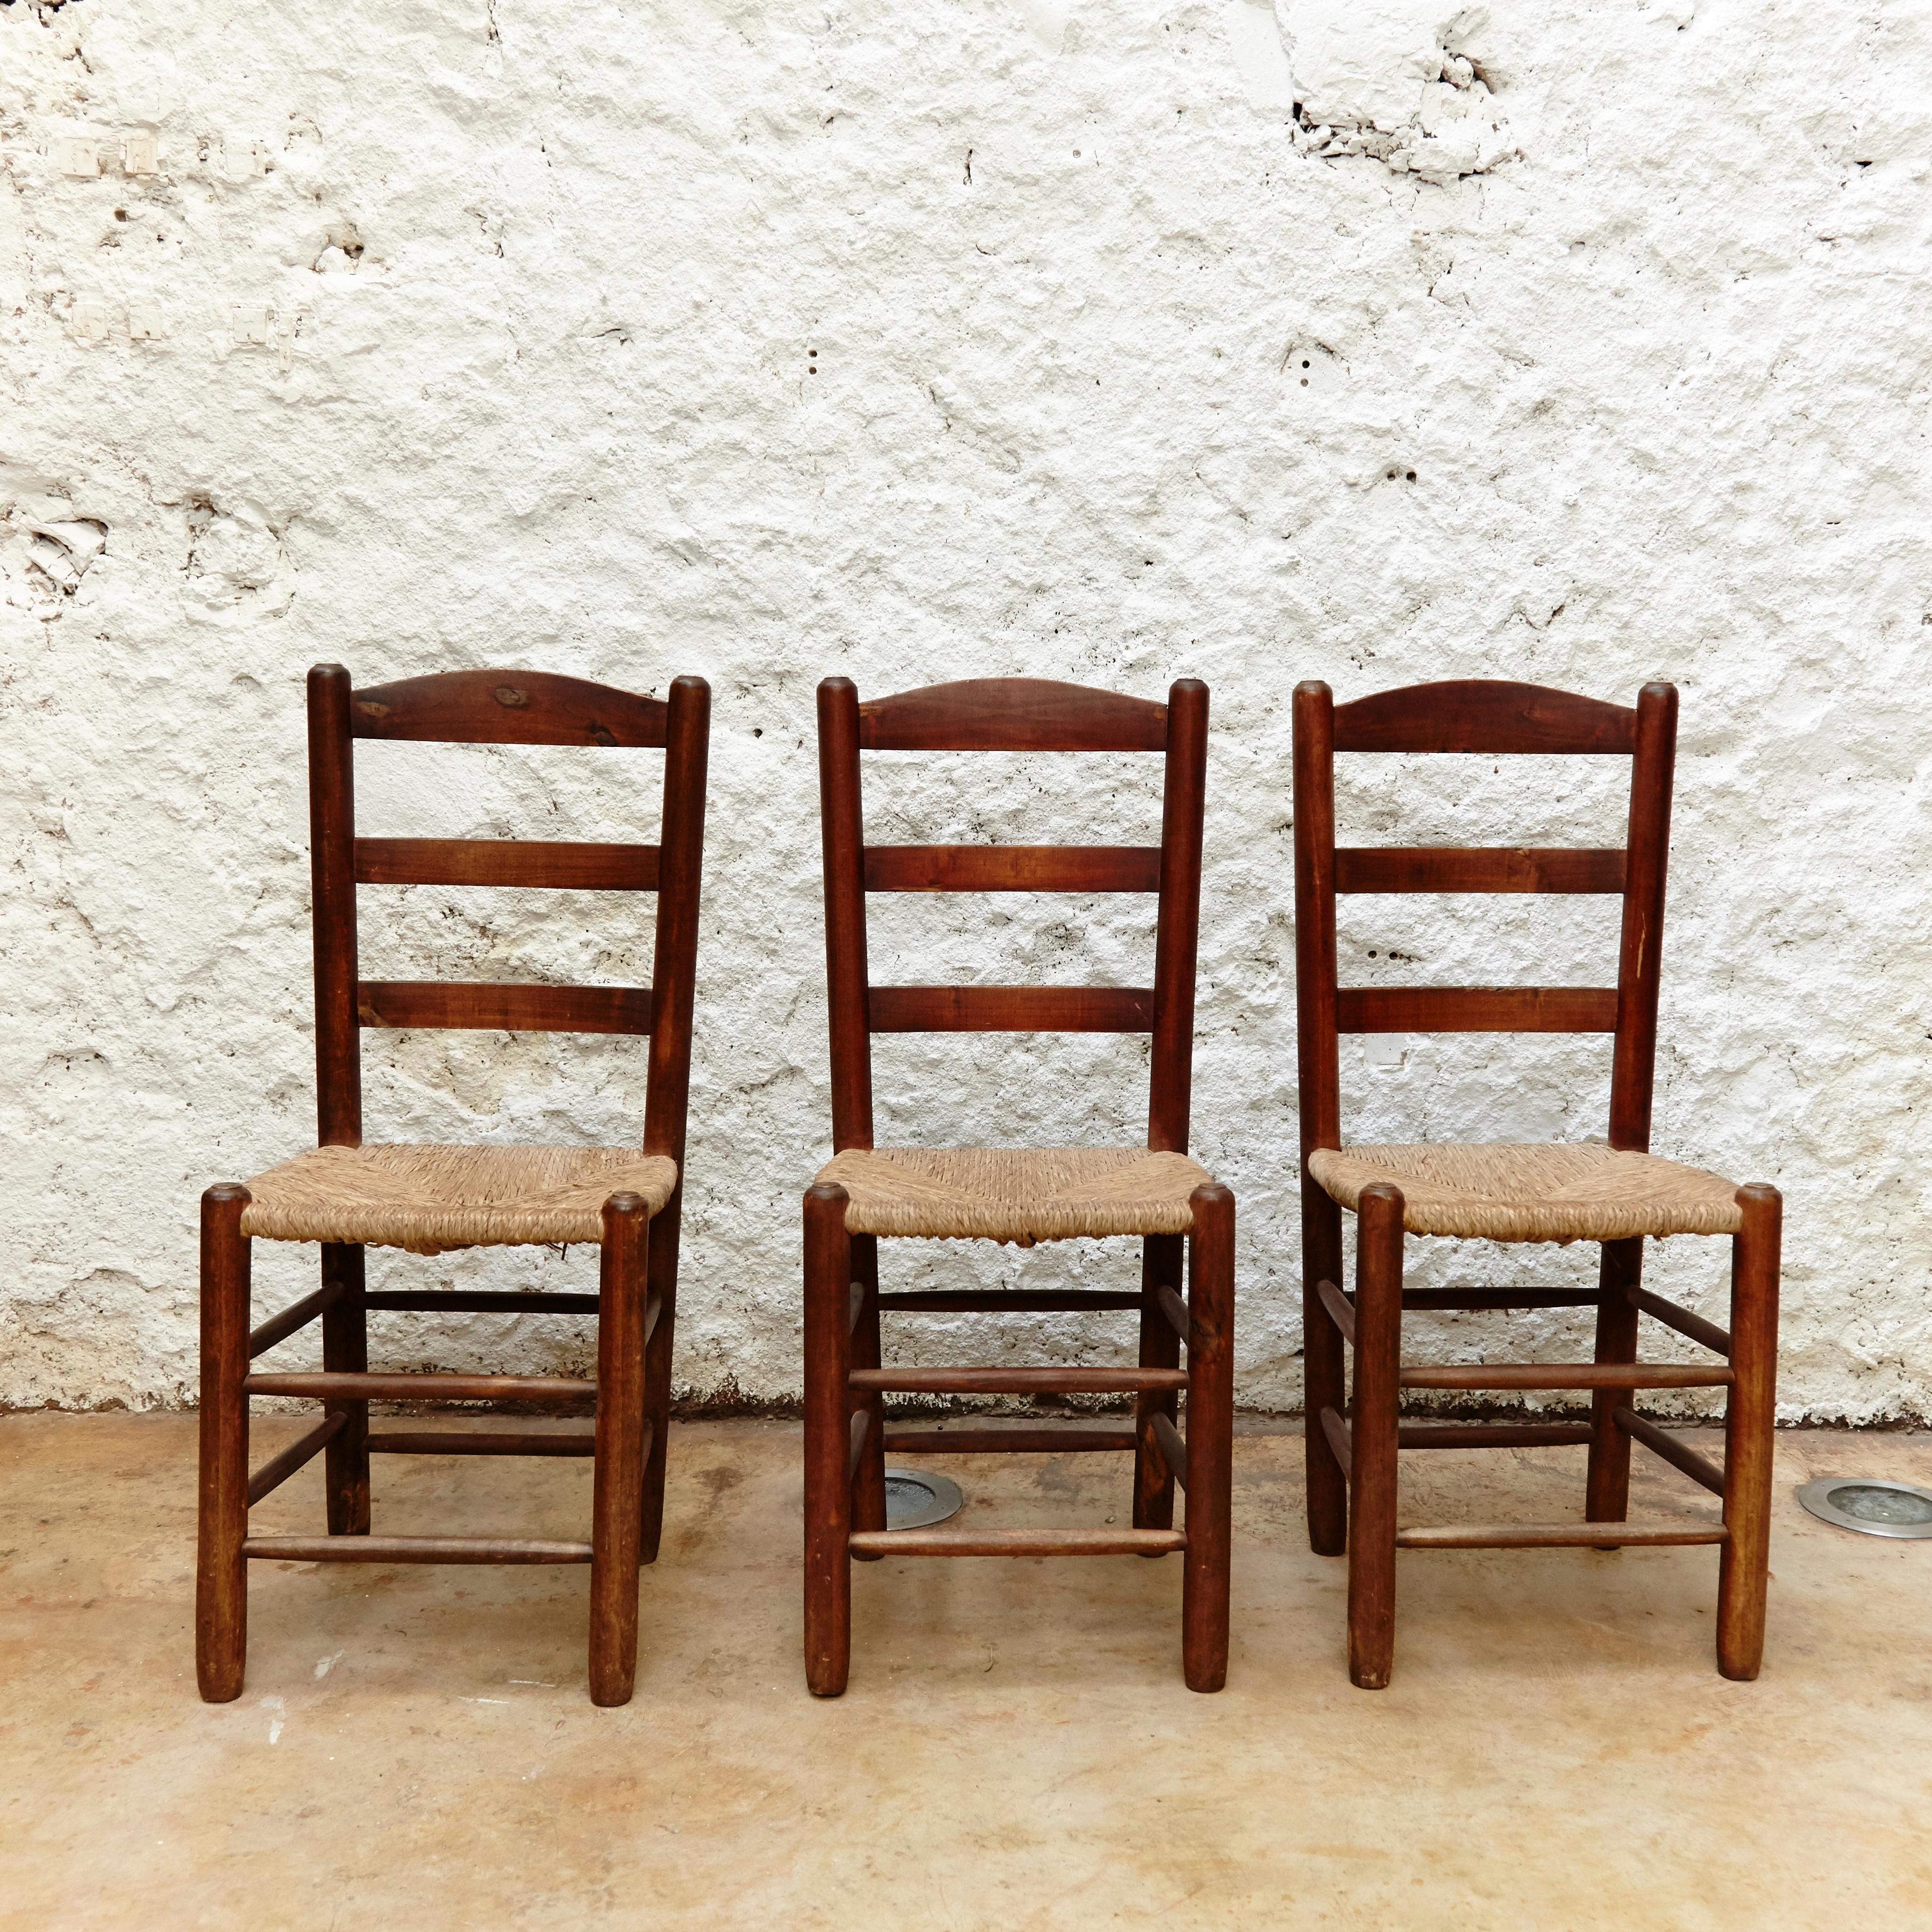 Chairs designed in the style of Charlotte Perriand, made by unknown manufacturer.

Wood and rattan.

In original condition, with minor wear consistent with age and use, preserving a beautiful patina.

They are 3 slight different from the other